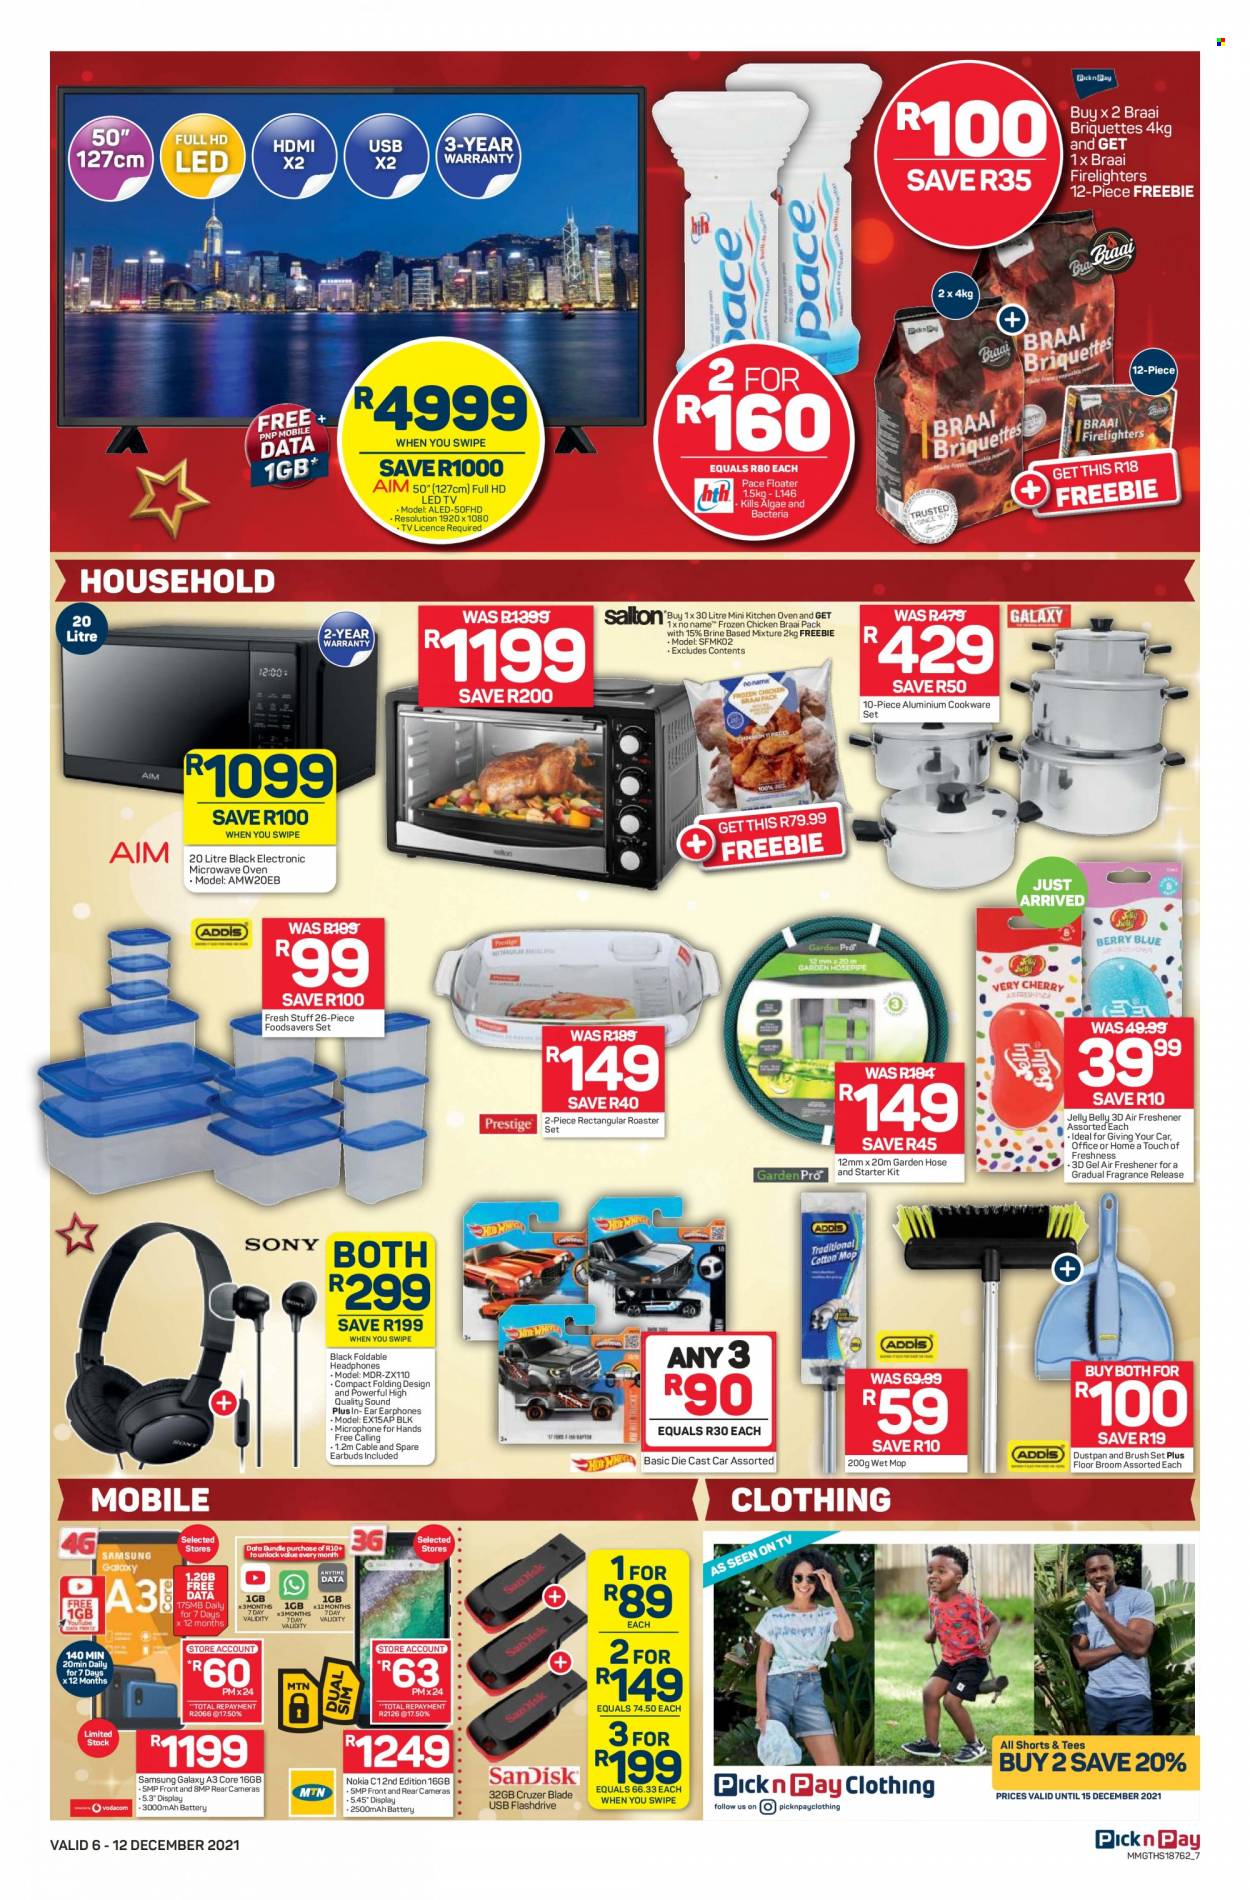 Pick n Pay specials - 12.06.2021 - 12.12.2021. 